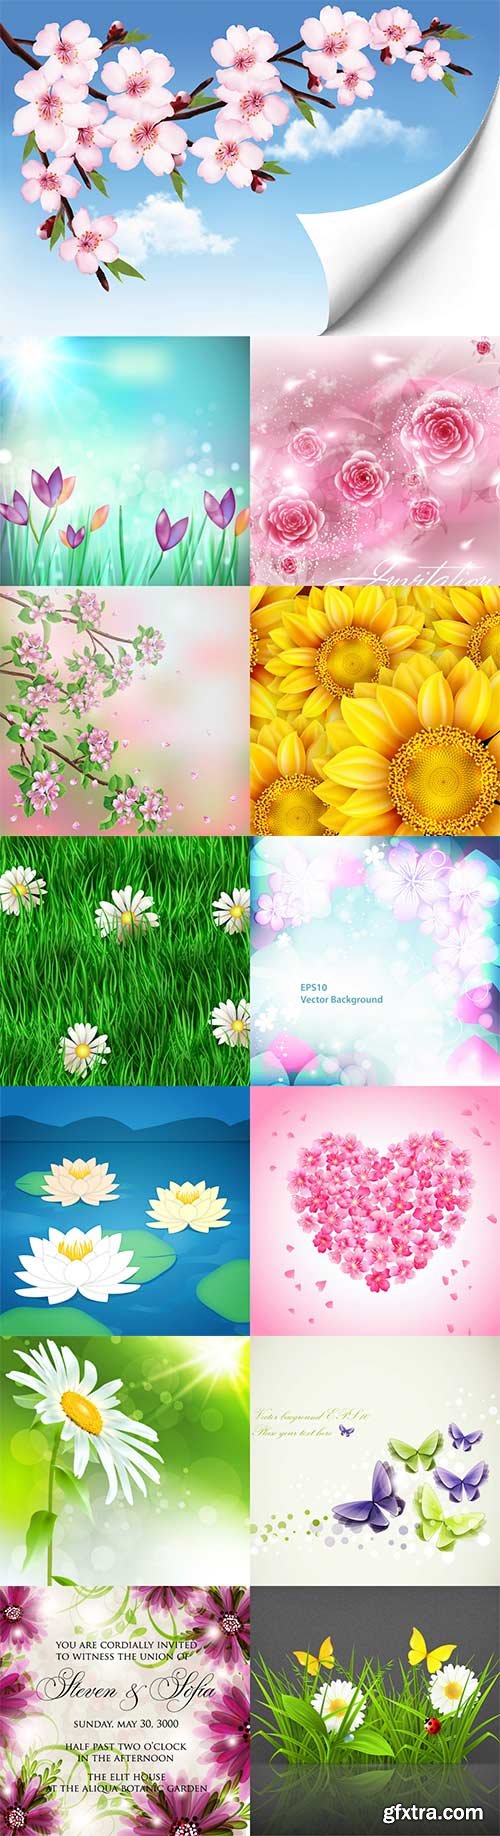 Awesome vector flowers